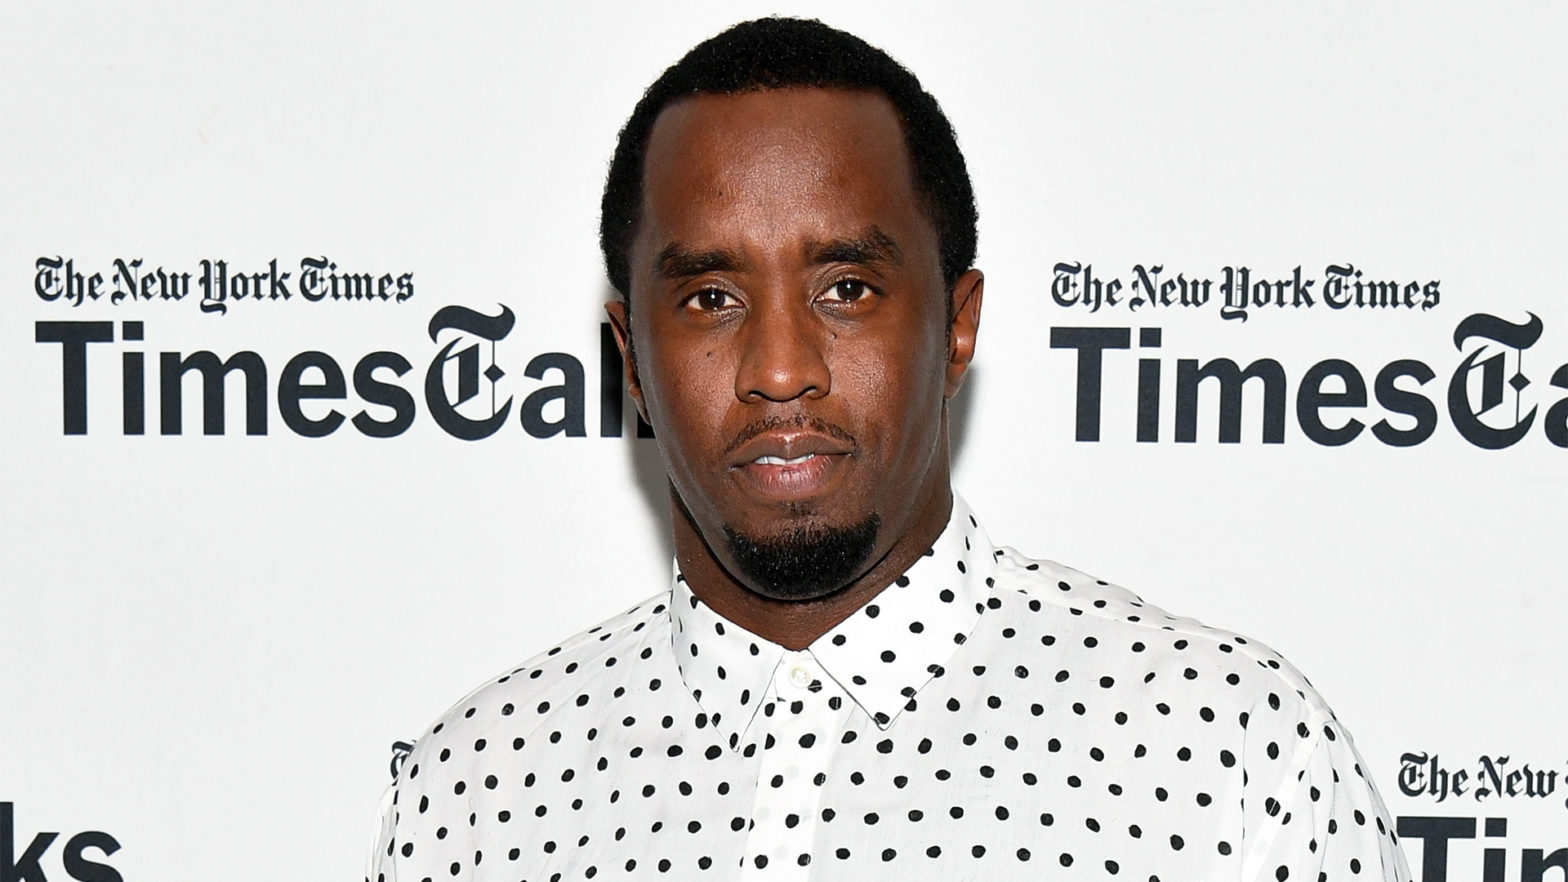 New Allegations From Sean 'Diddy' Combs Against Diageo Include Developing A Watermelon-Flavored Tequila Despite His Objections